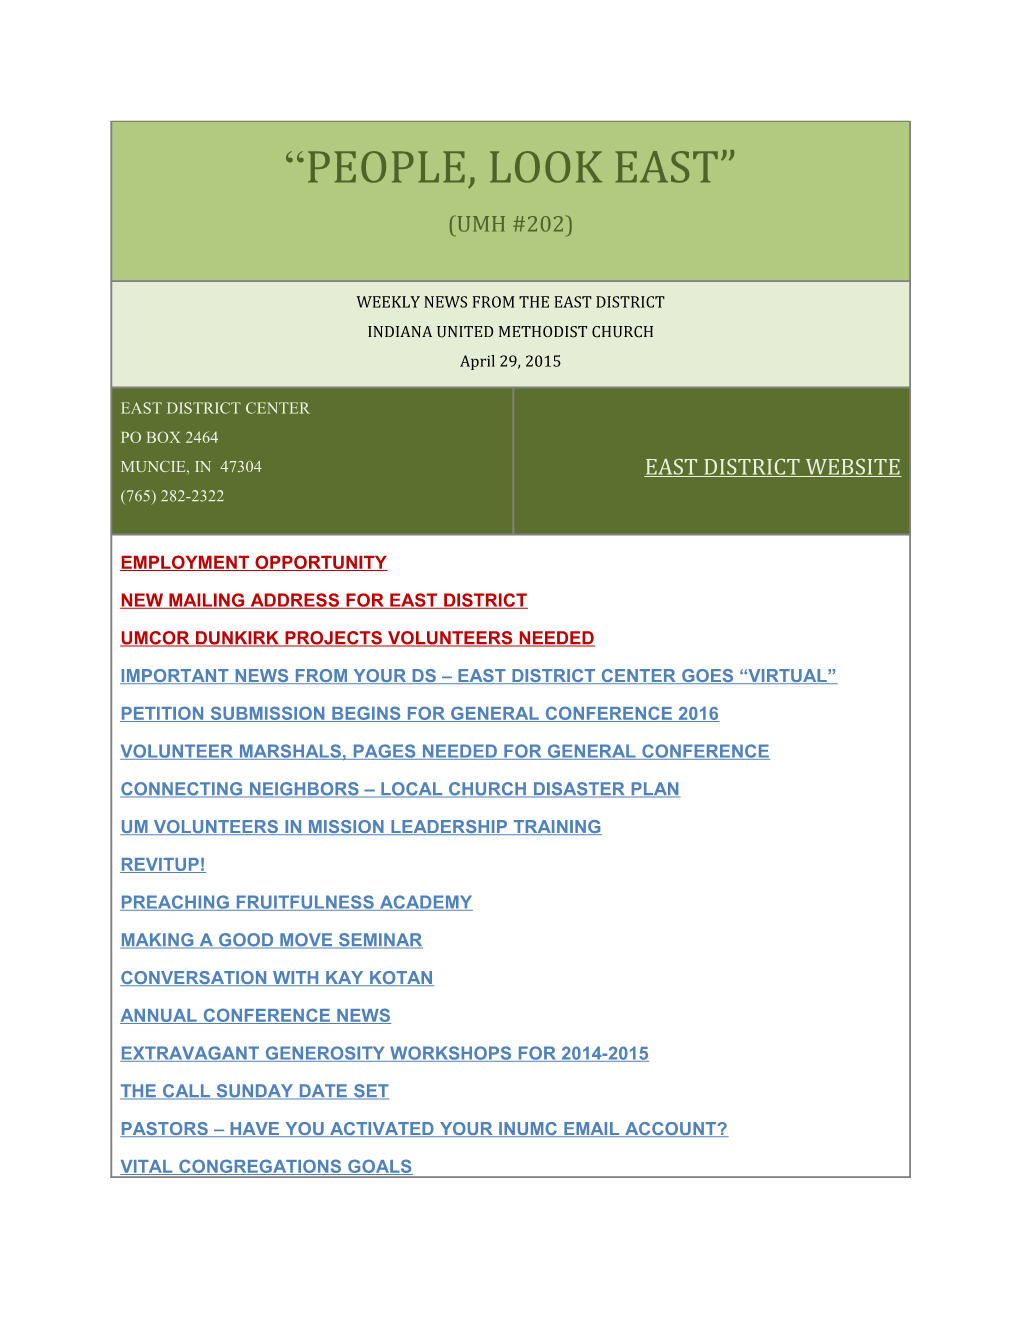 New Mailing Address for East District